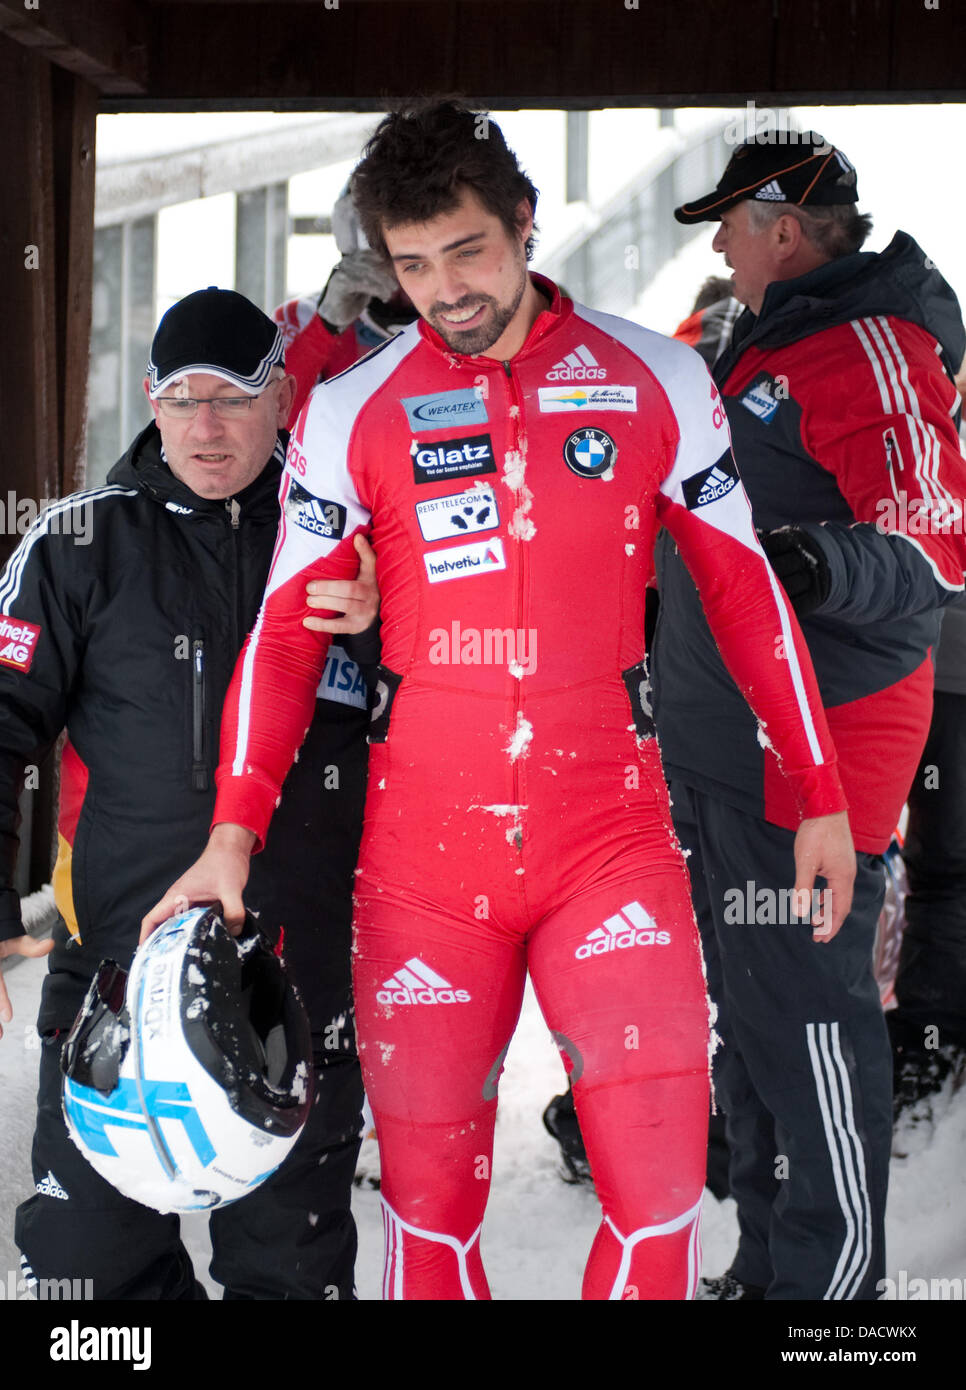 Swiss bob pilot Gregor Baumann is accompanied from the finish after a crash during the bob world cup in Winterberg, Germany, 18 December 2011. His crew remained unharmed and came in 11th place. Photo: Bernd Thissen Stock Photo